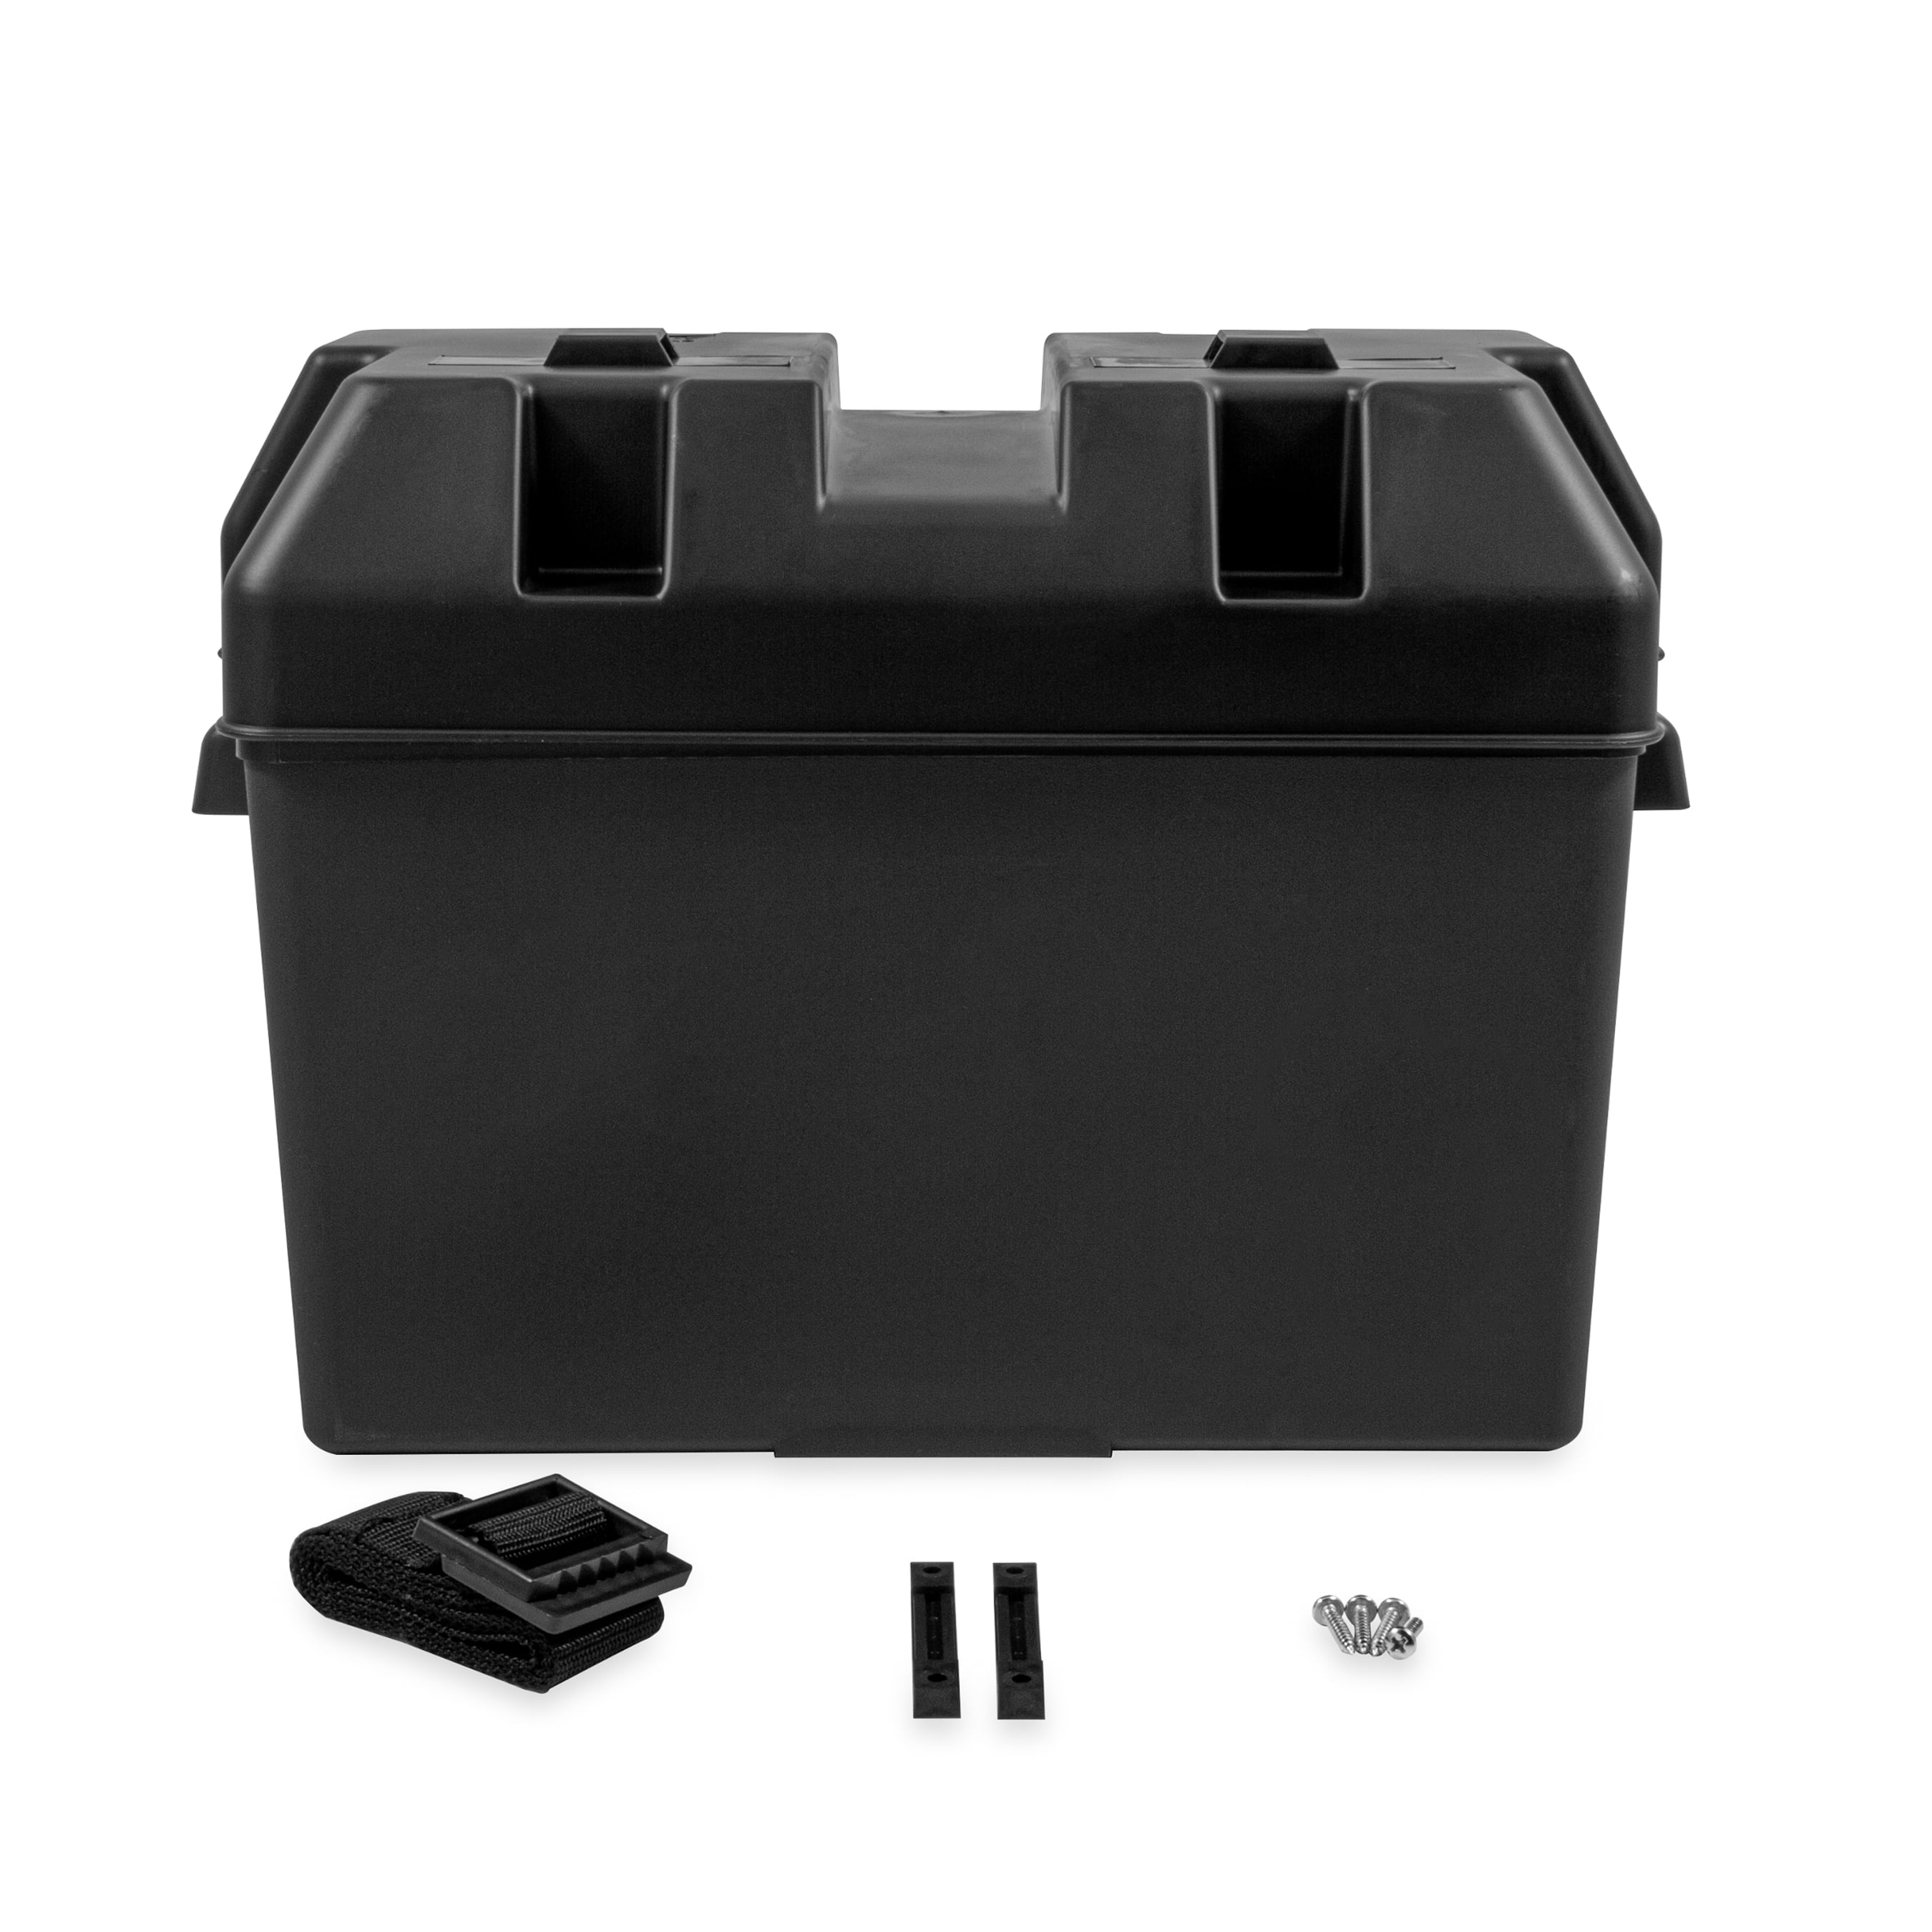 Camco Large Battery Box with Straps and Hardware - 27, 30, 31, for RV, Auto, and Marine Batteries, Inside 7-1/4" x 13-1/4" x 8-5/8", Black Walmart.com